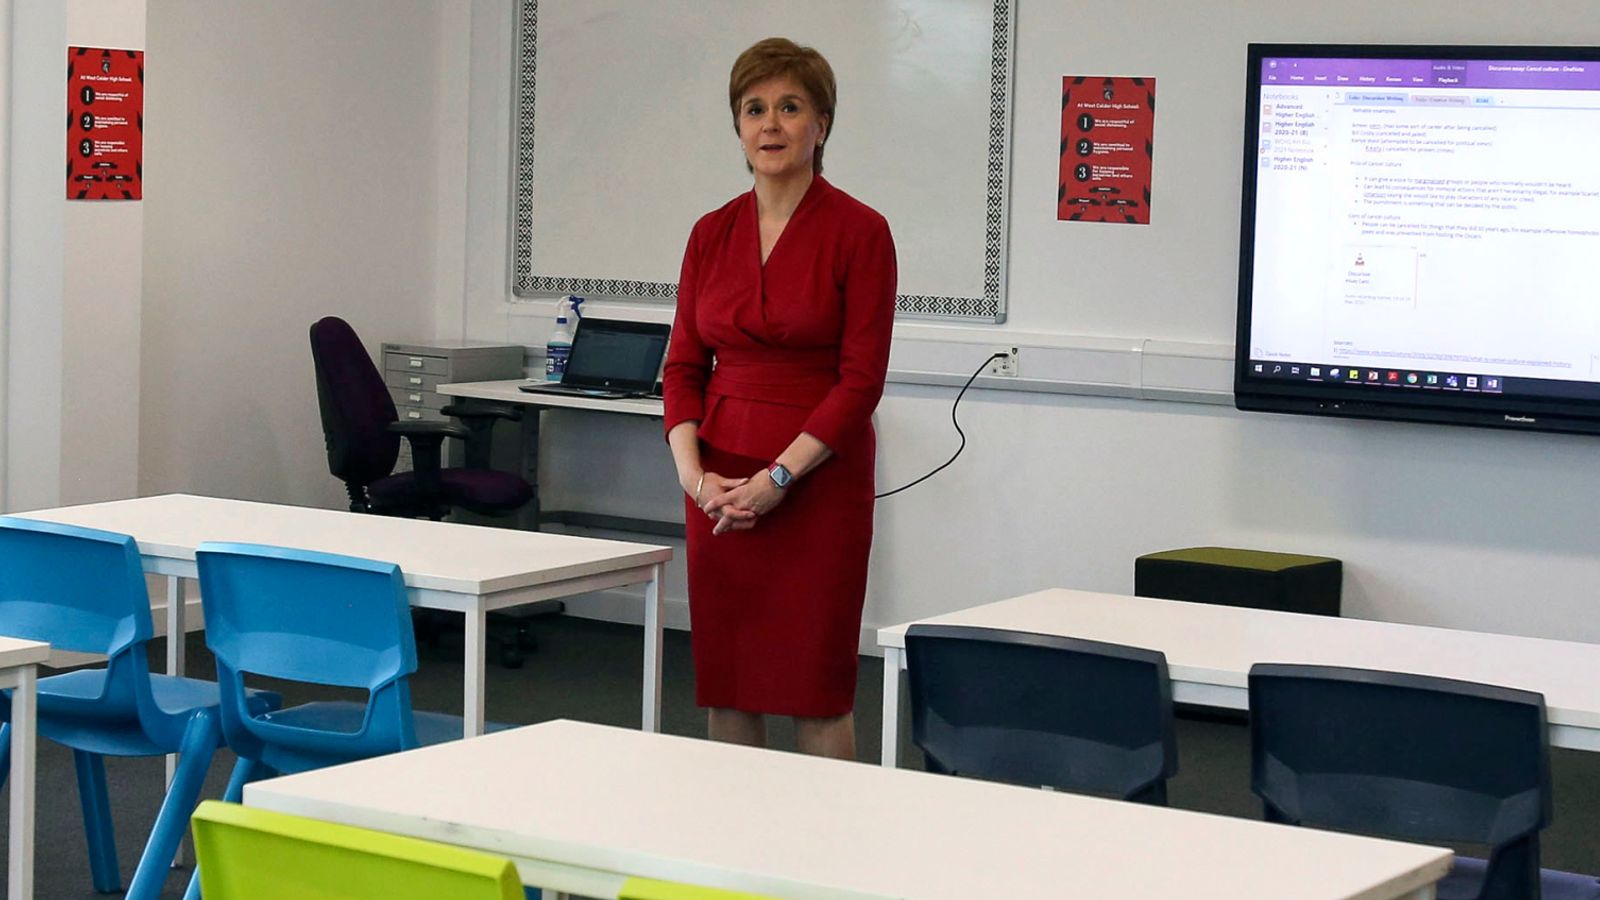 Scotland's first minister Nicola Sturgeon visited West Calder High School in West Lothian to see how staff were preparing to welcome students back